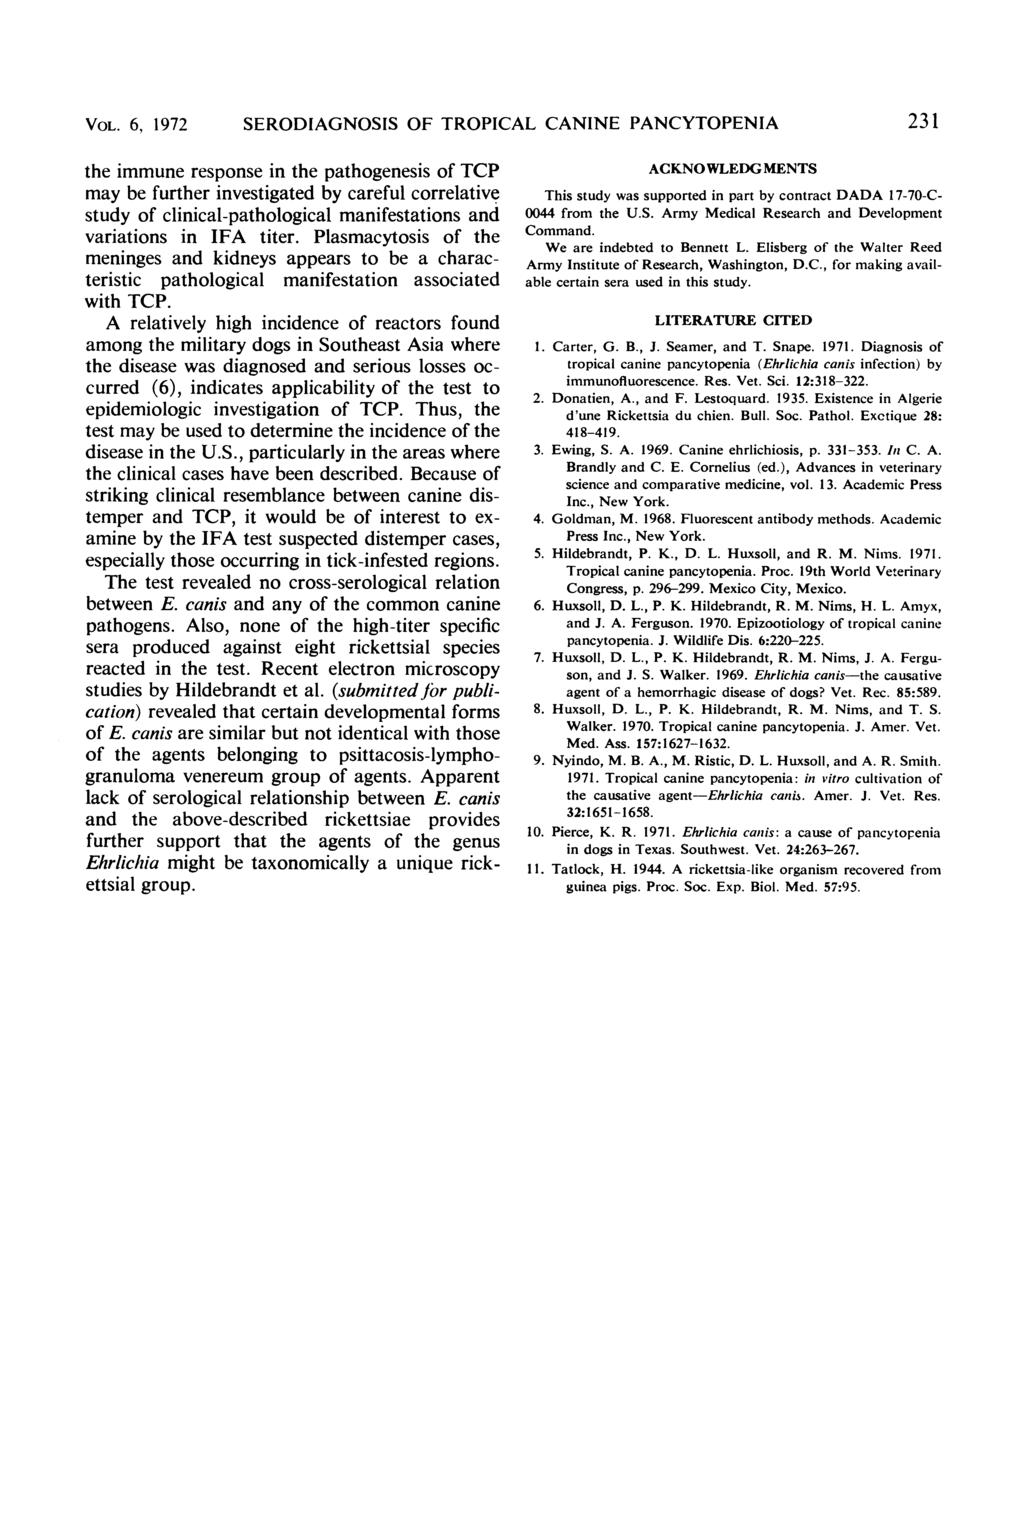 VOL. 6, 1972 SERODIAGNOSIS OF TROPICAL CANINE PANCYTOPENIA 231 the immune response in the pathogenesis of TCP may be further investigated by careful correlative study of clinical-pathological